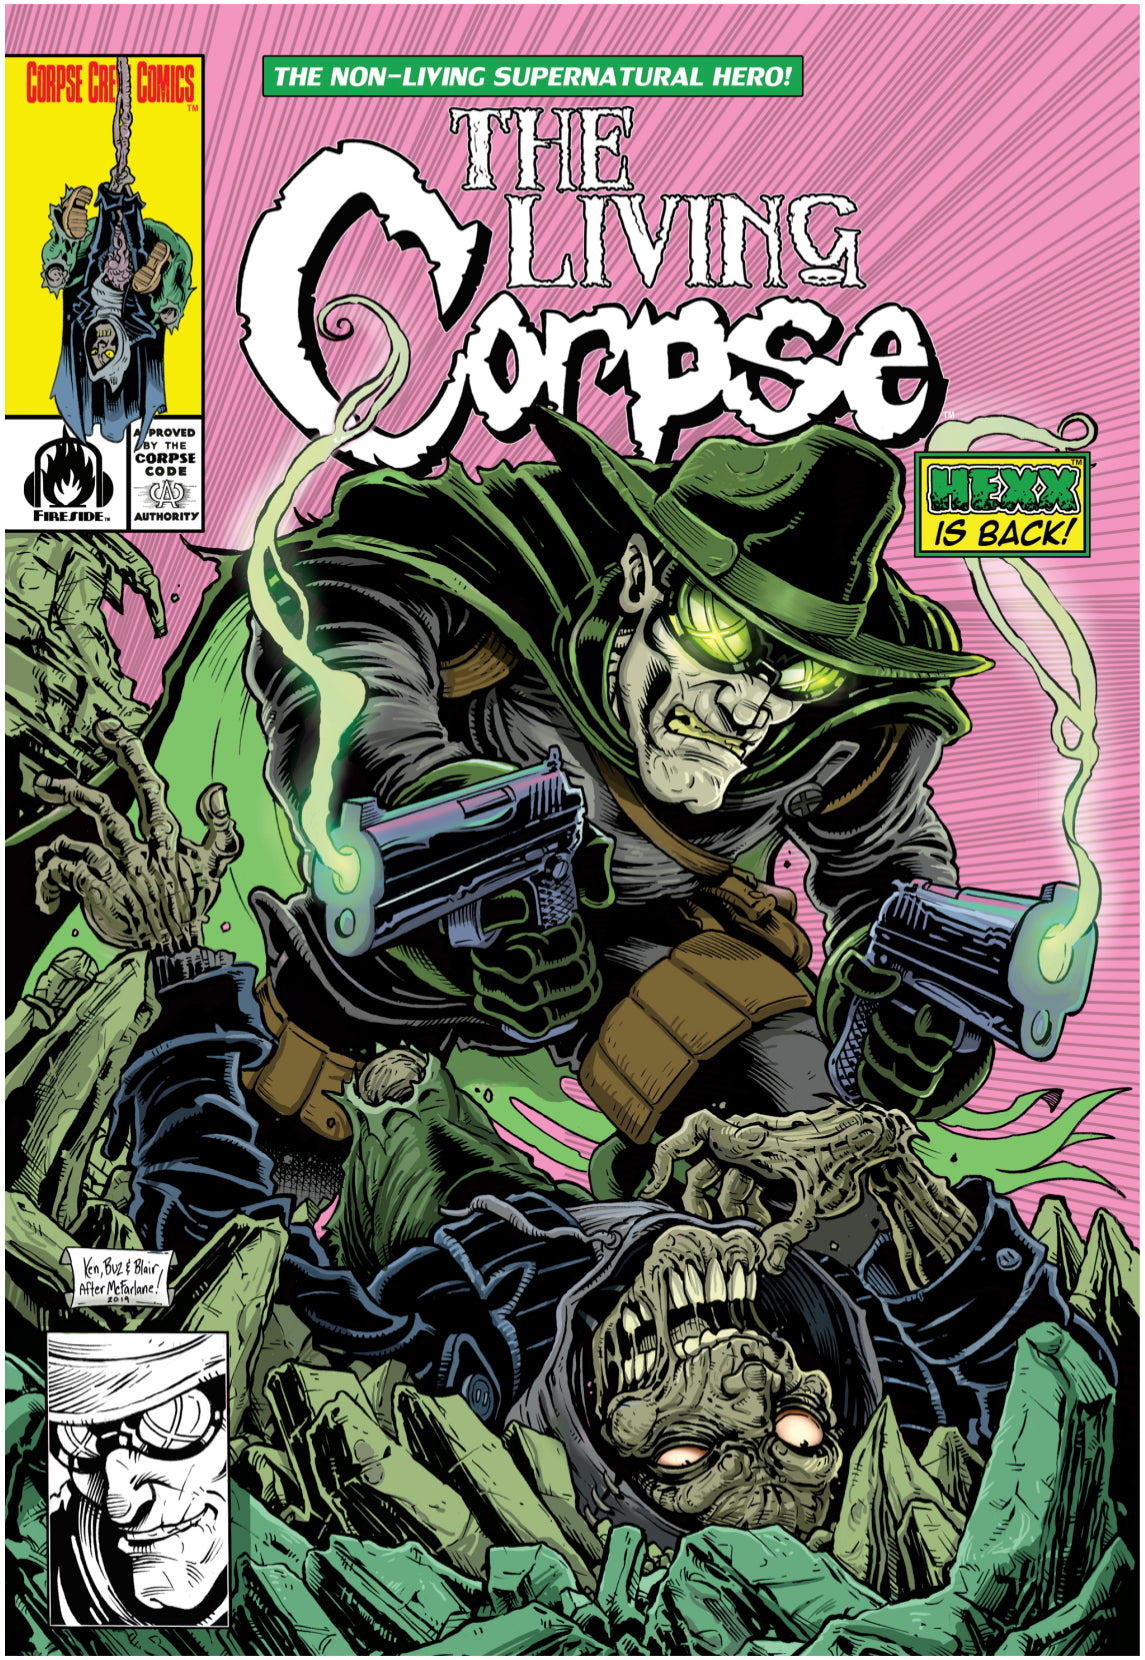 The Living Corpse: Hexx Files (limited print run)